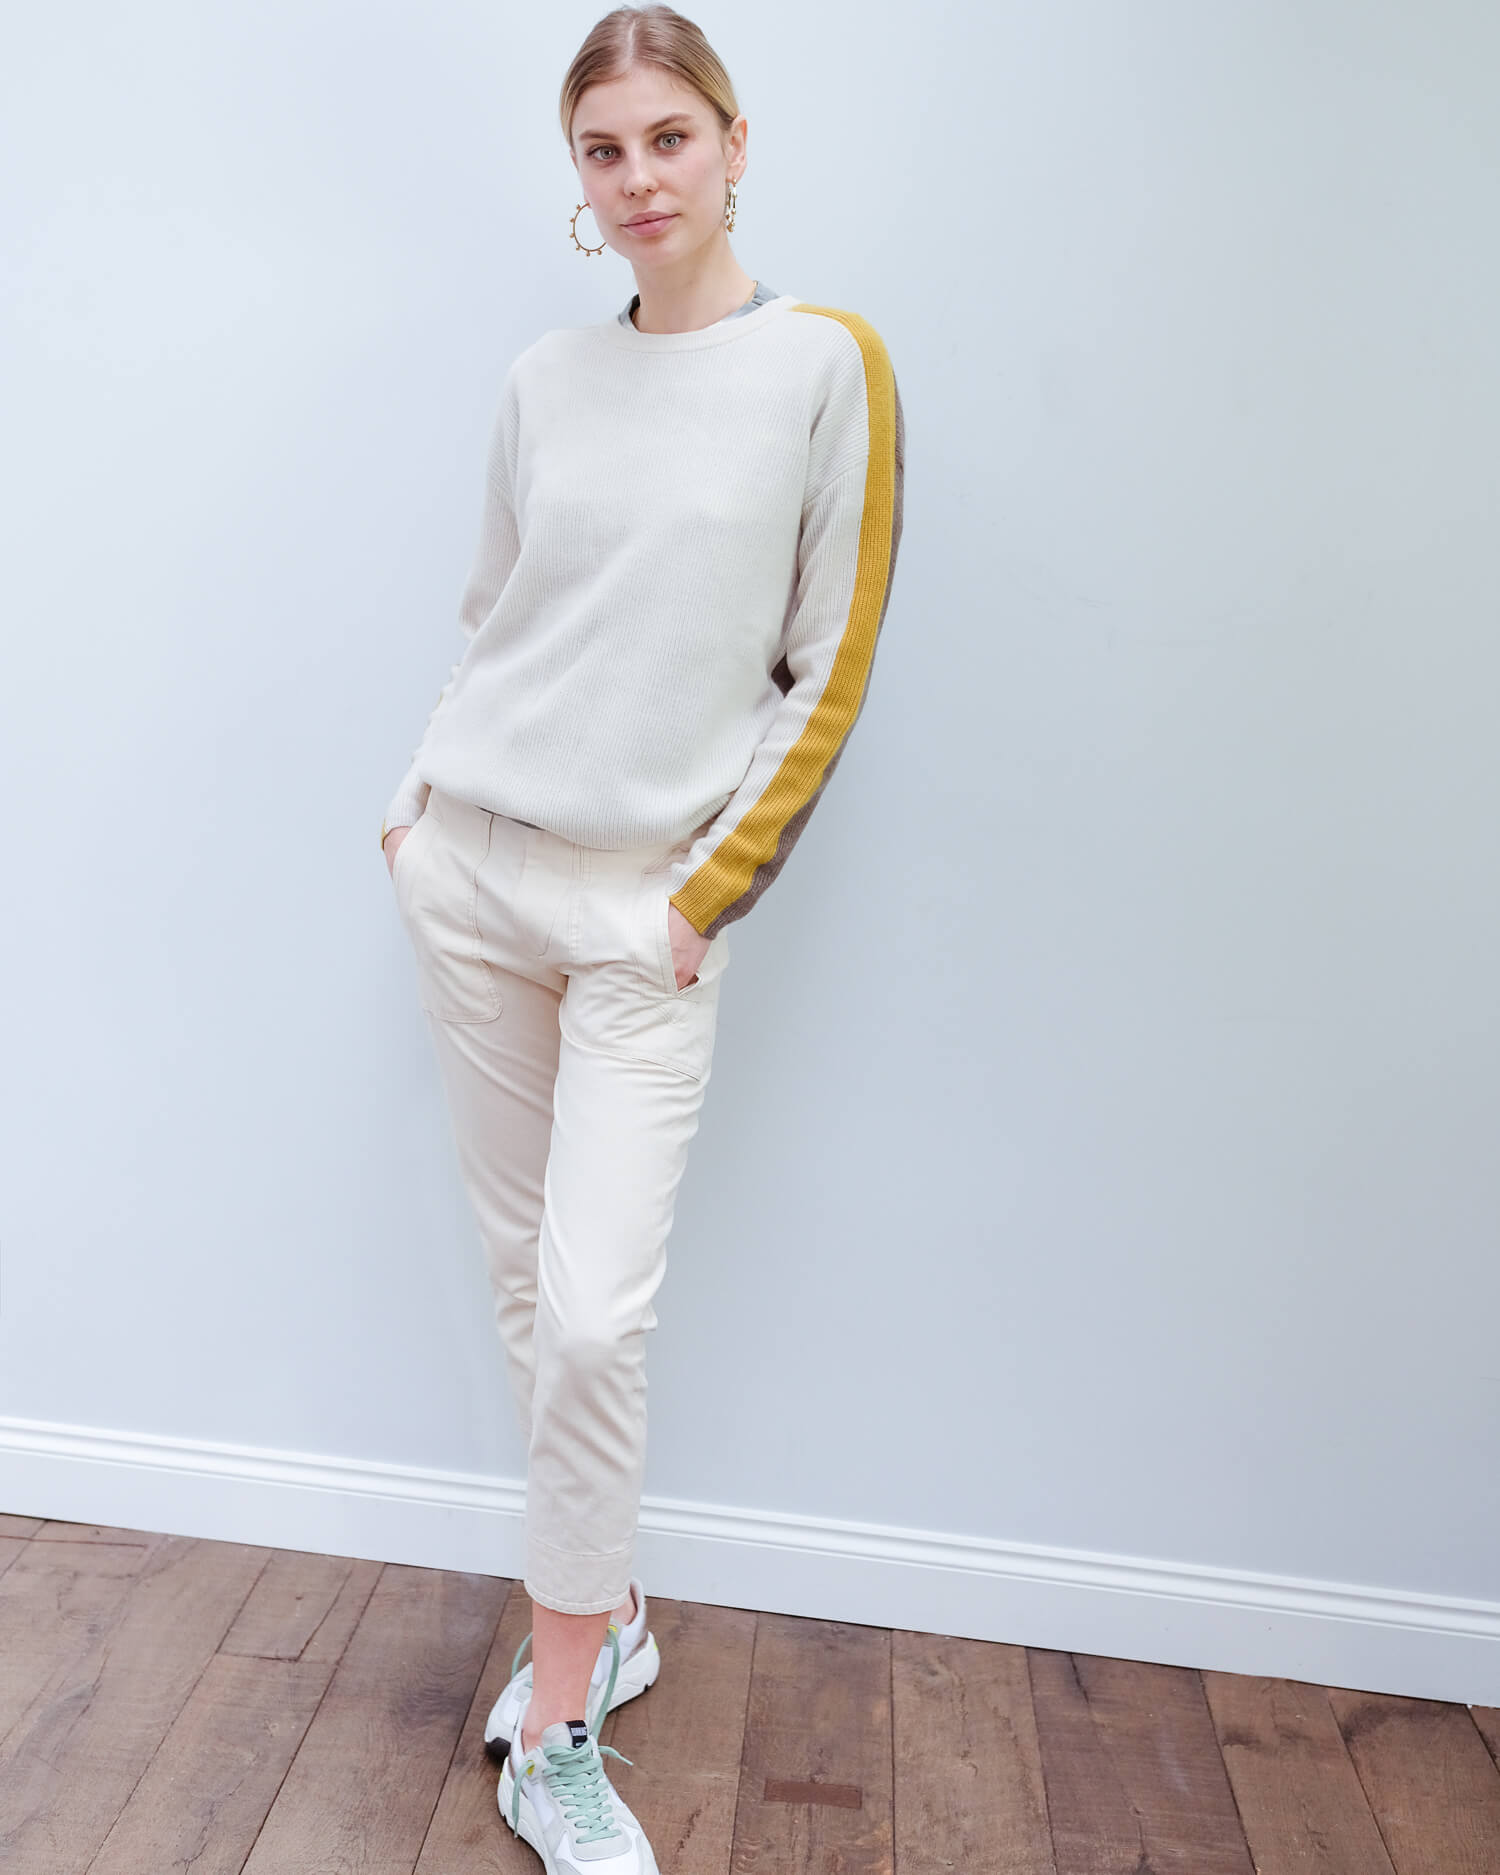 V Polly cashmere knit in milk